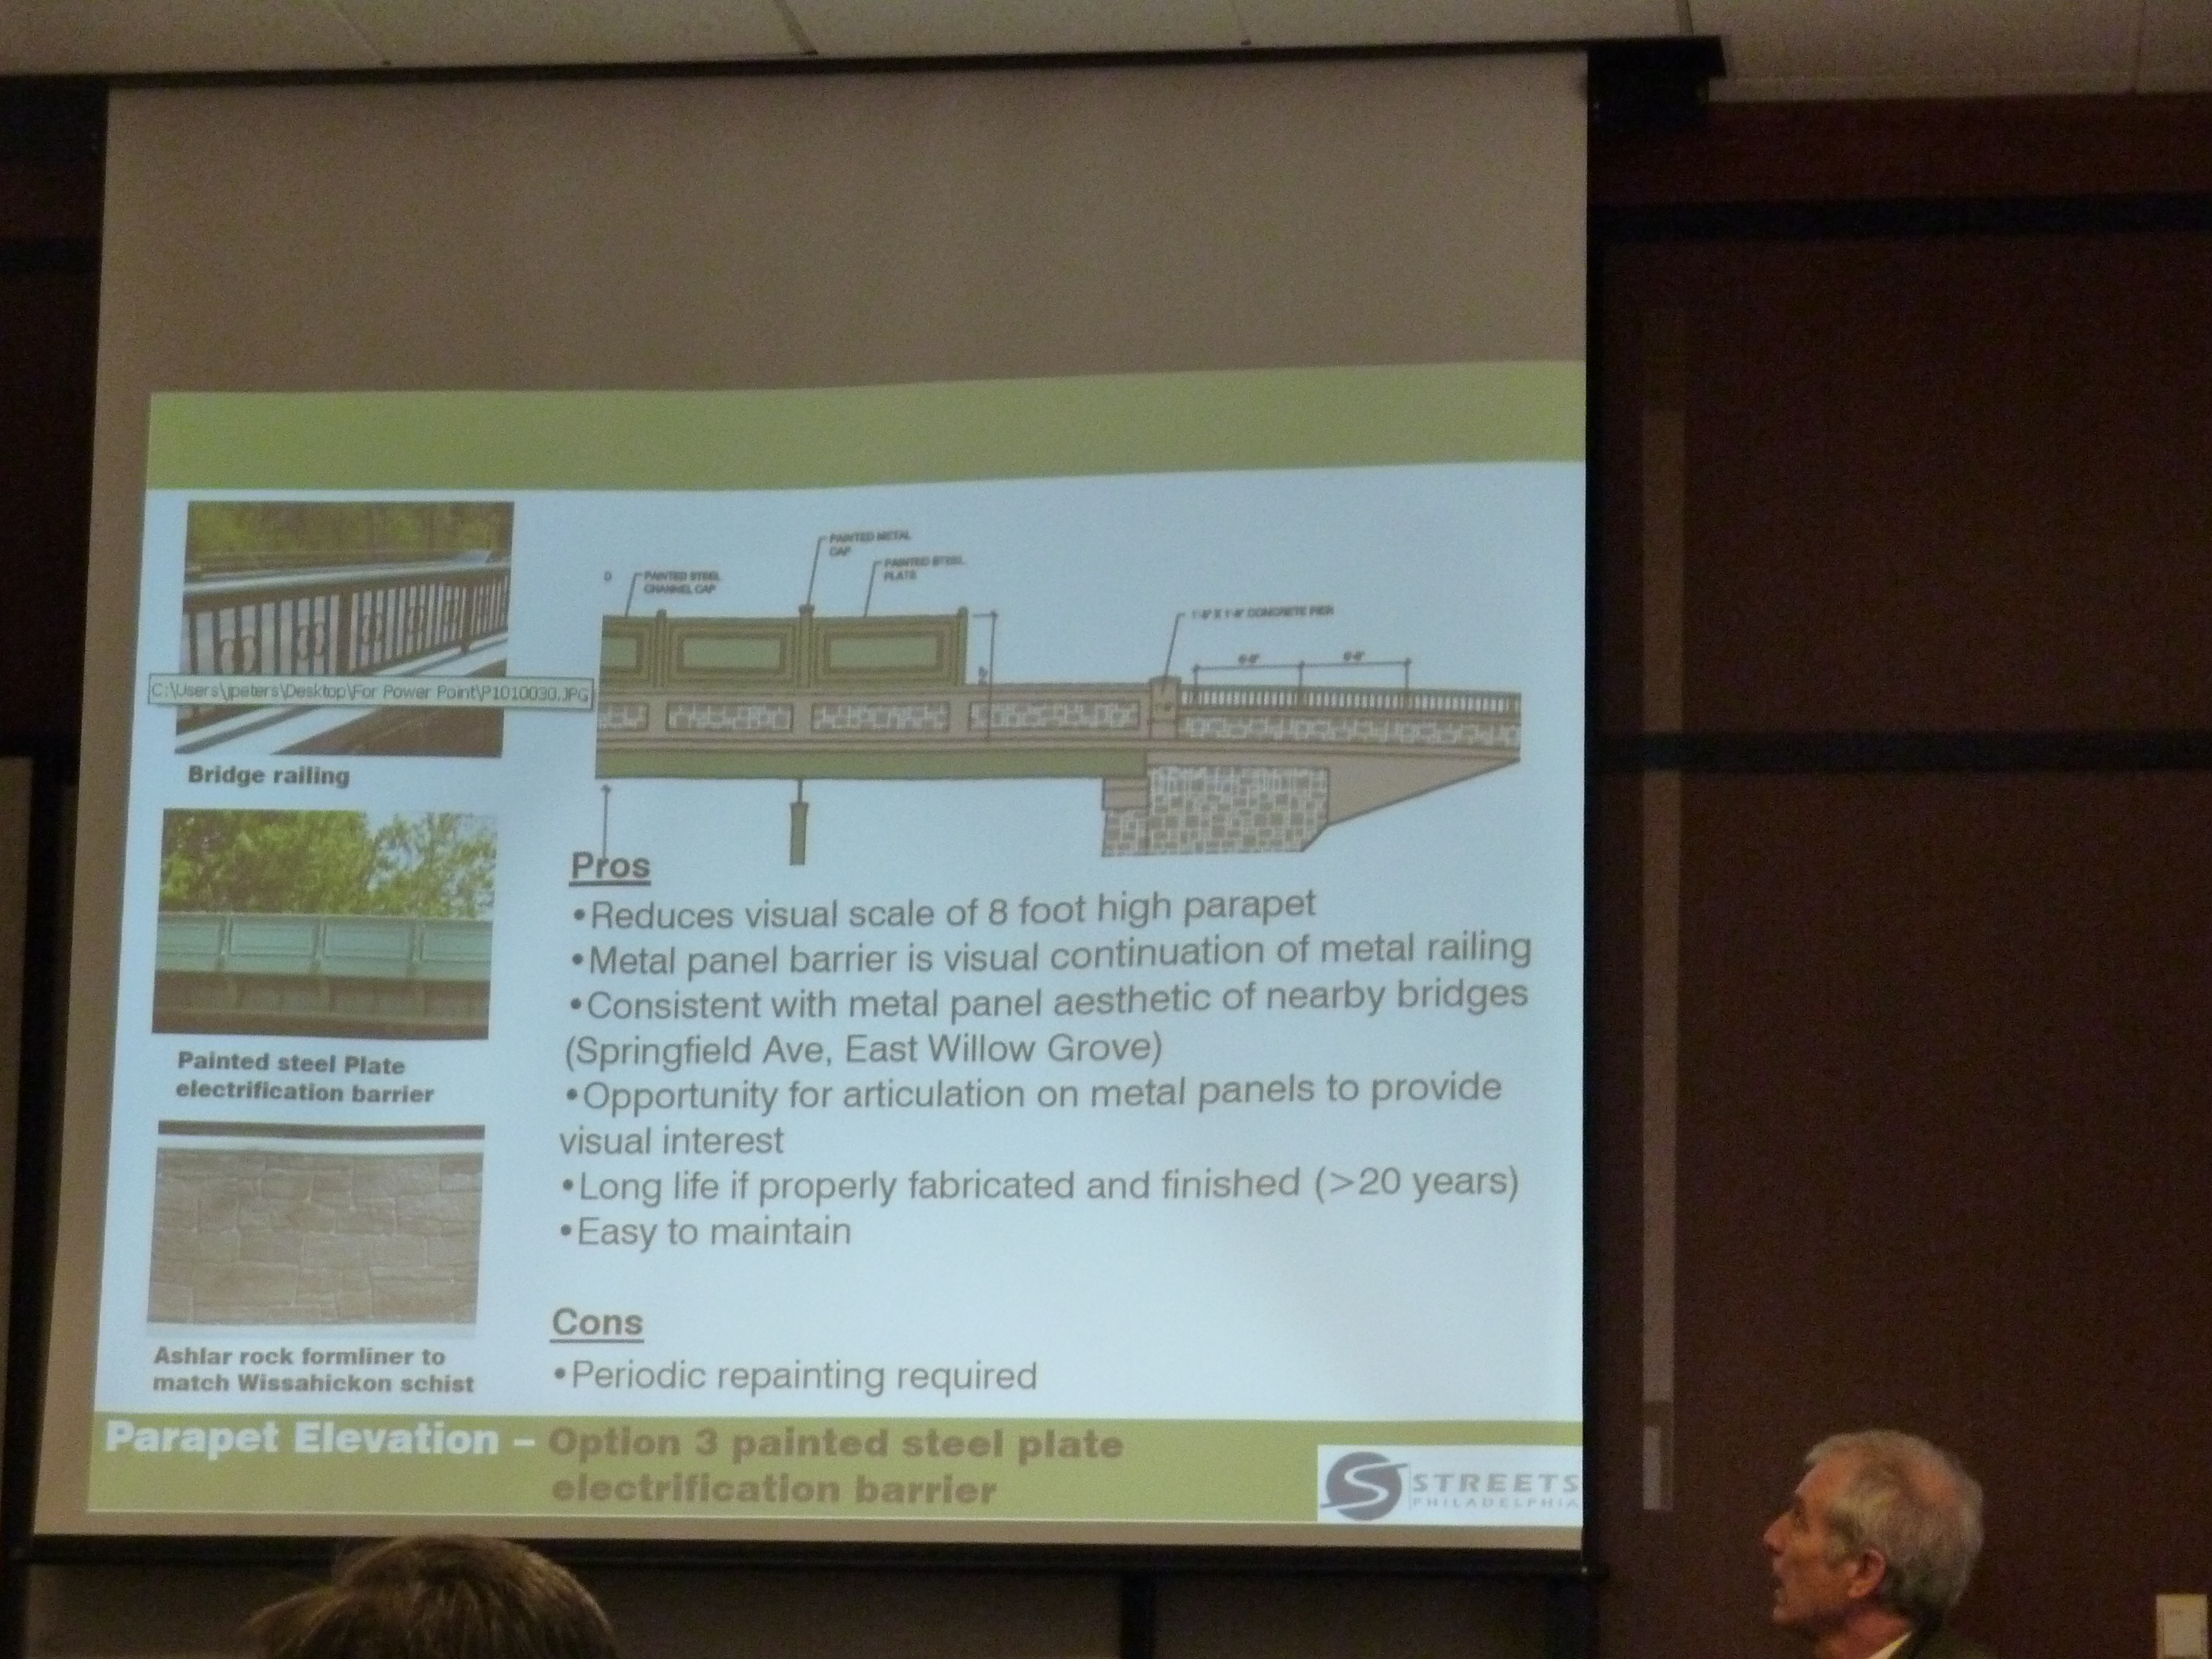 Art Commission reviews bus loop, bridge, and sewer facility projects